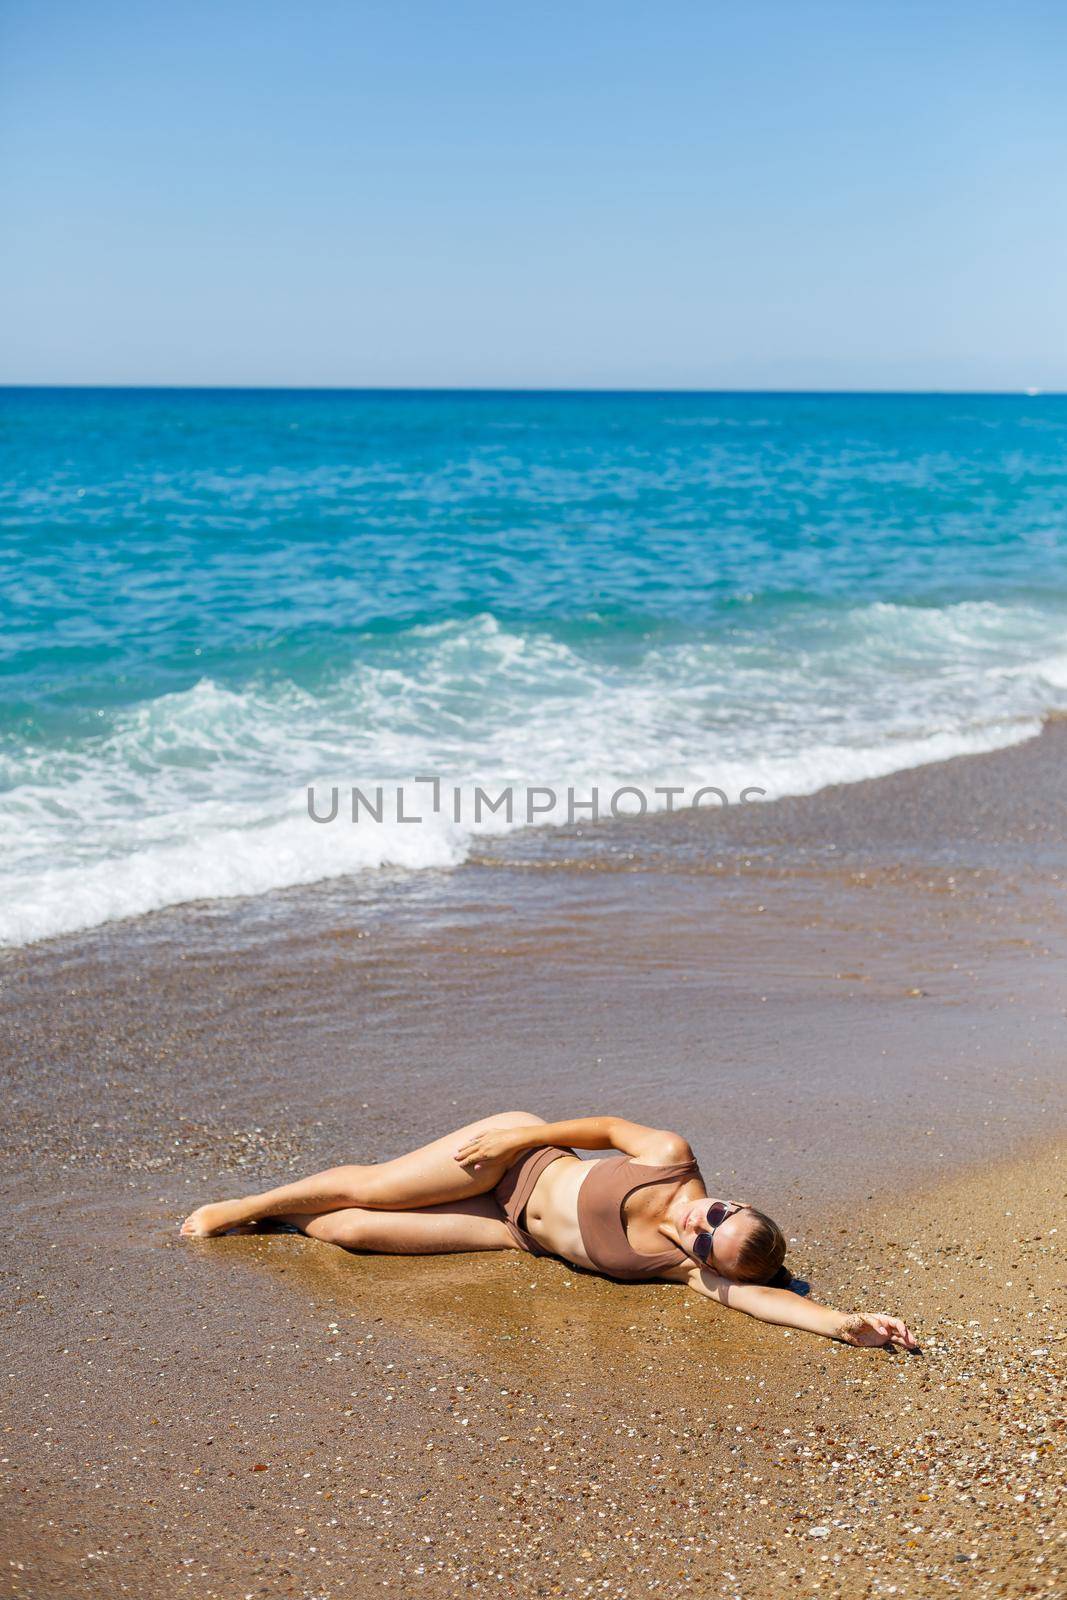 An attractive young woman in a bikini lies on the sand by the sea, relaxing on a deserted beach. Beautiful model in a swimsuit resting on the fine sand on a tropical island